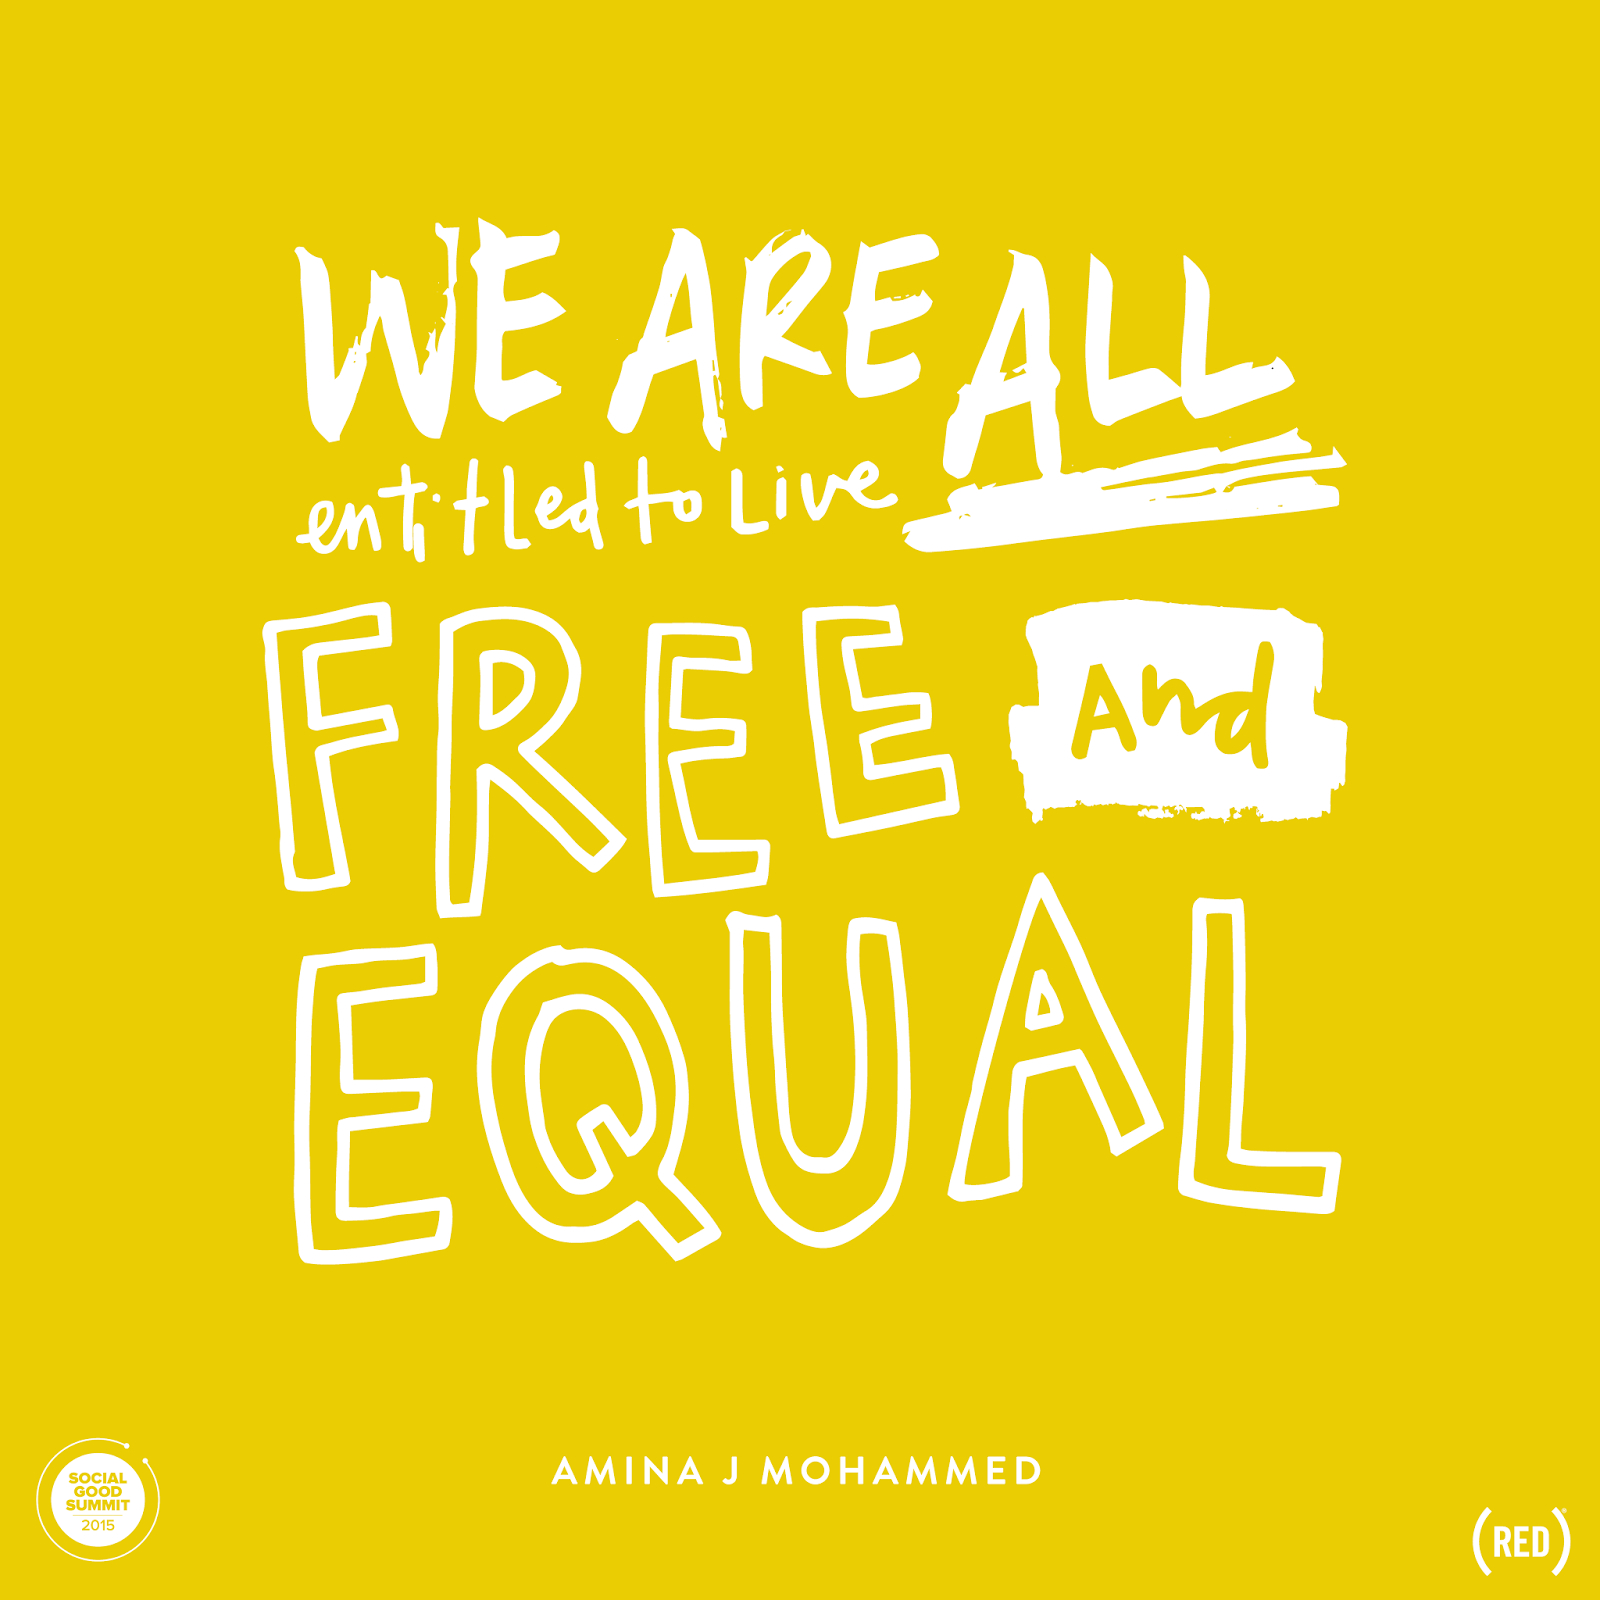 We are all entitled to live free and equal. Amina J Mohammed